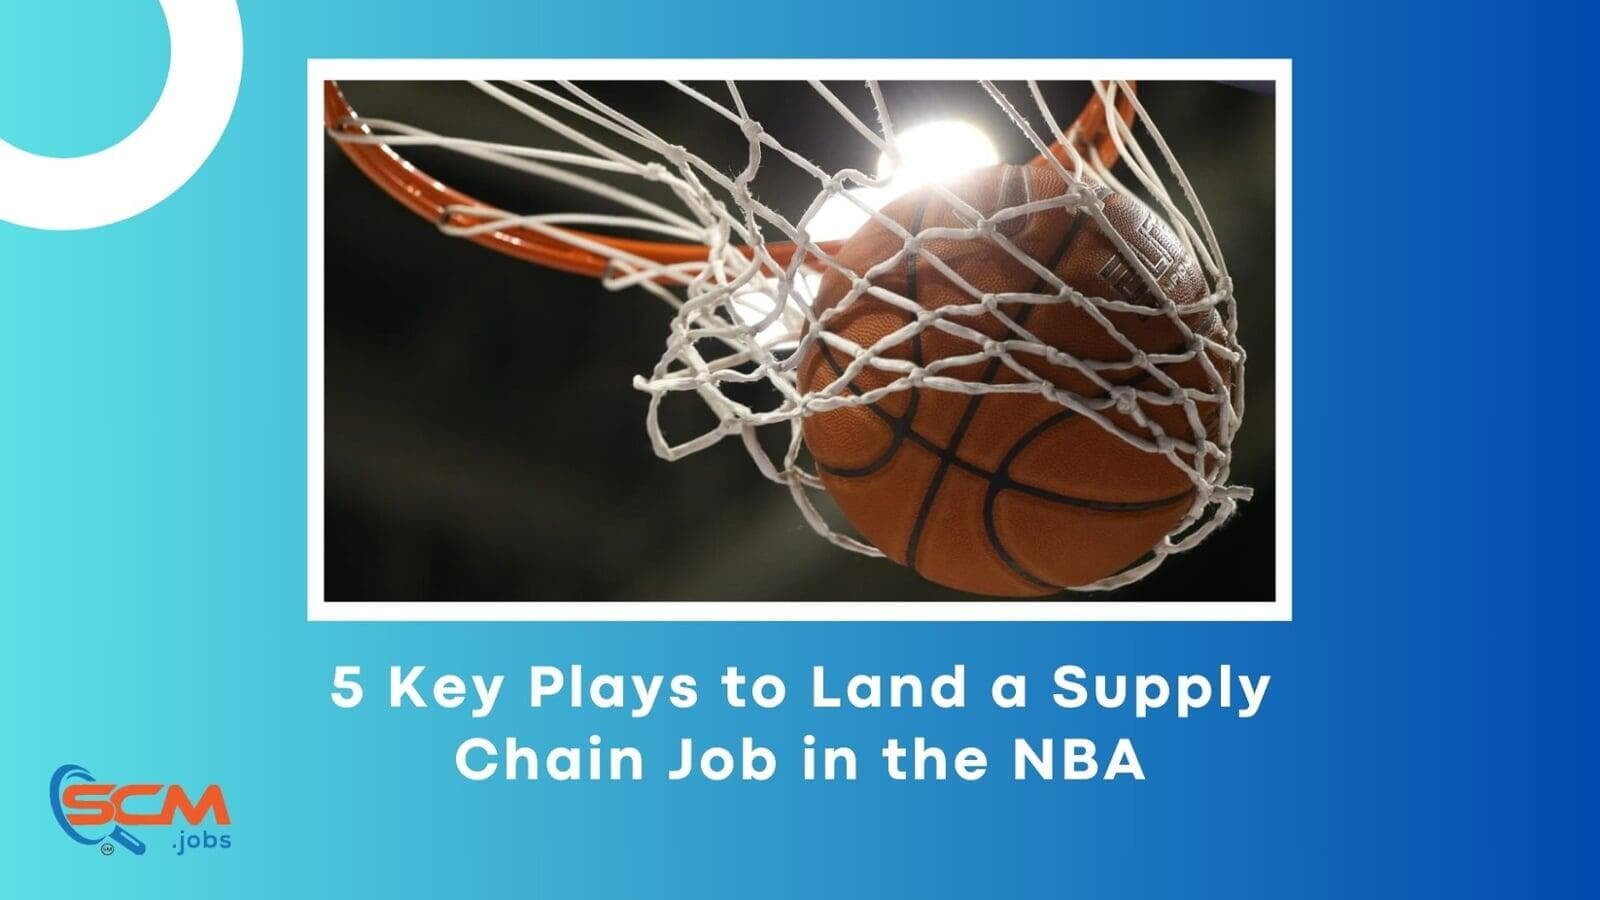 5 Key Plays to Land a Supply Chain Job in the NBA